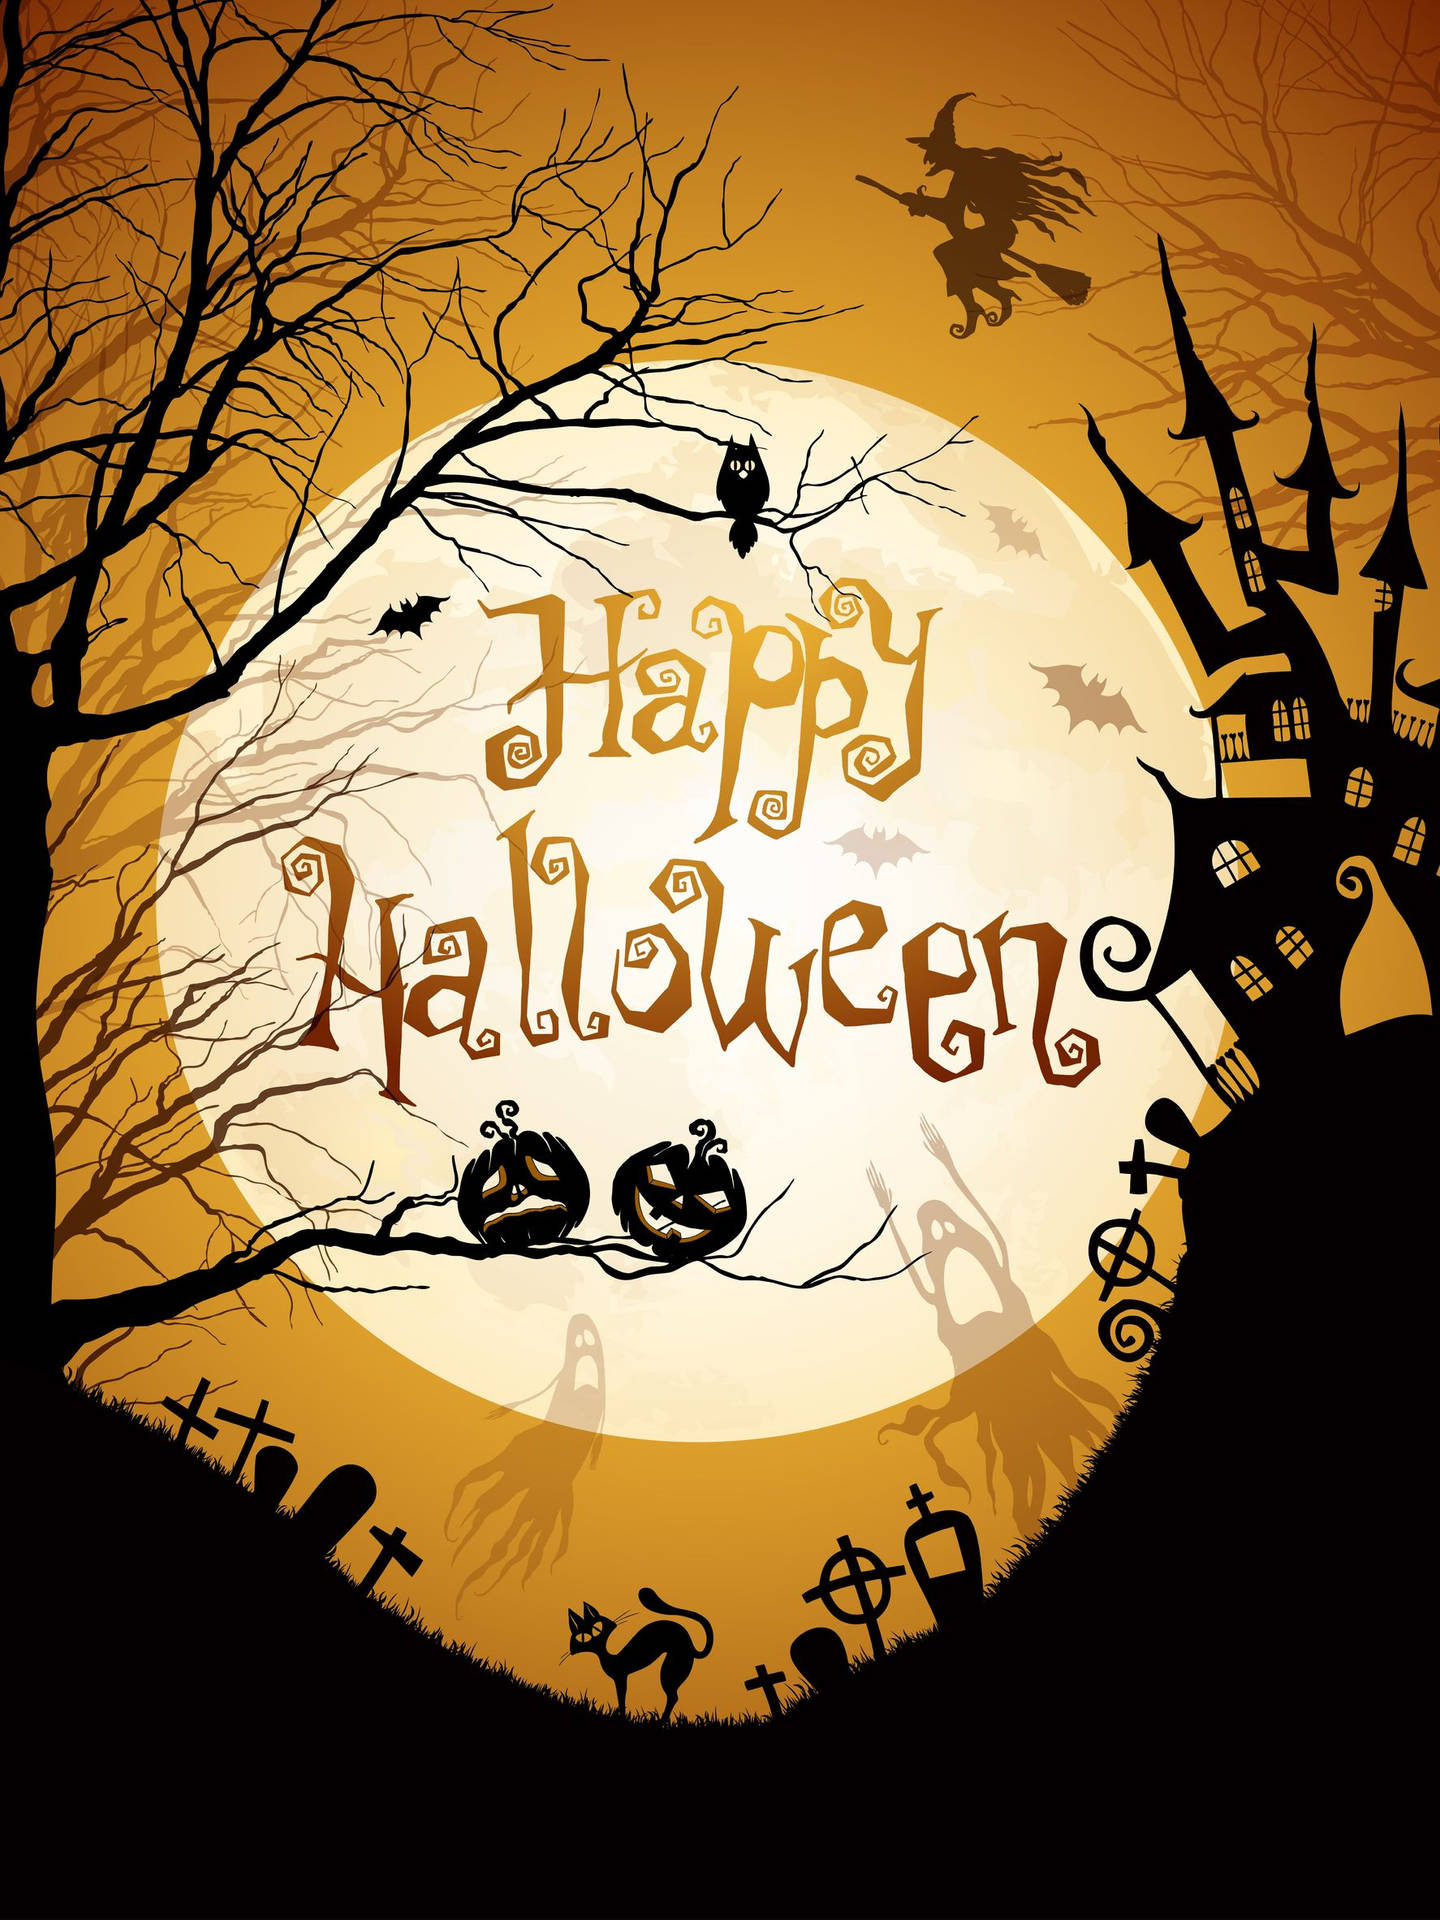 Celebrate A Happy, Fun And Spooky Halloween This Year!